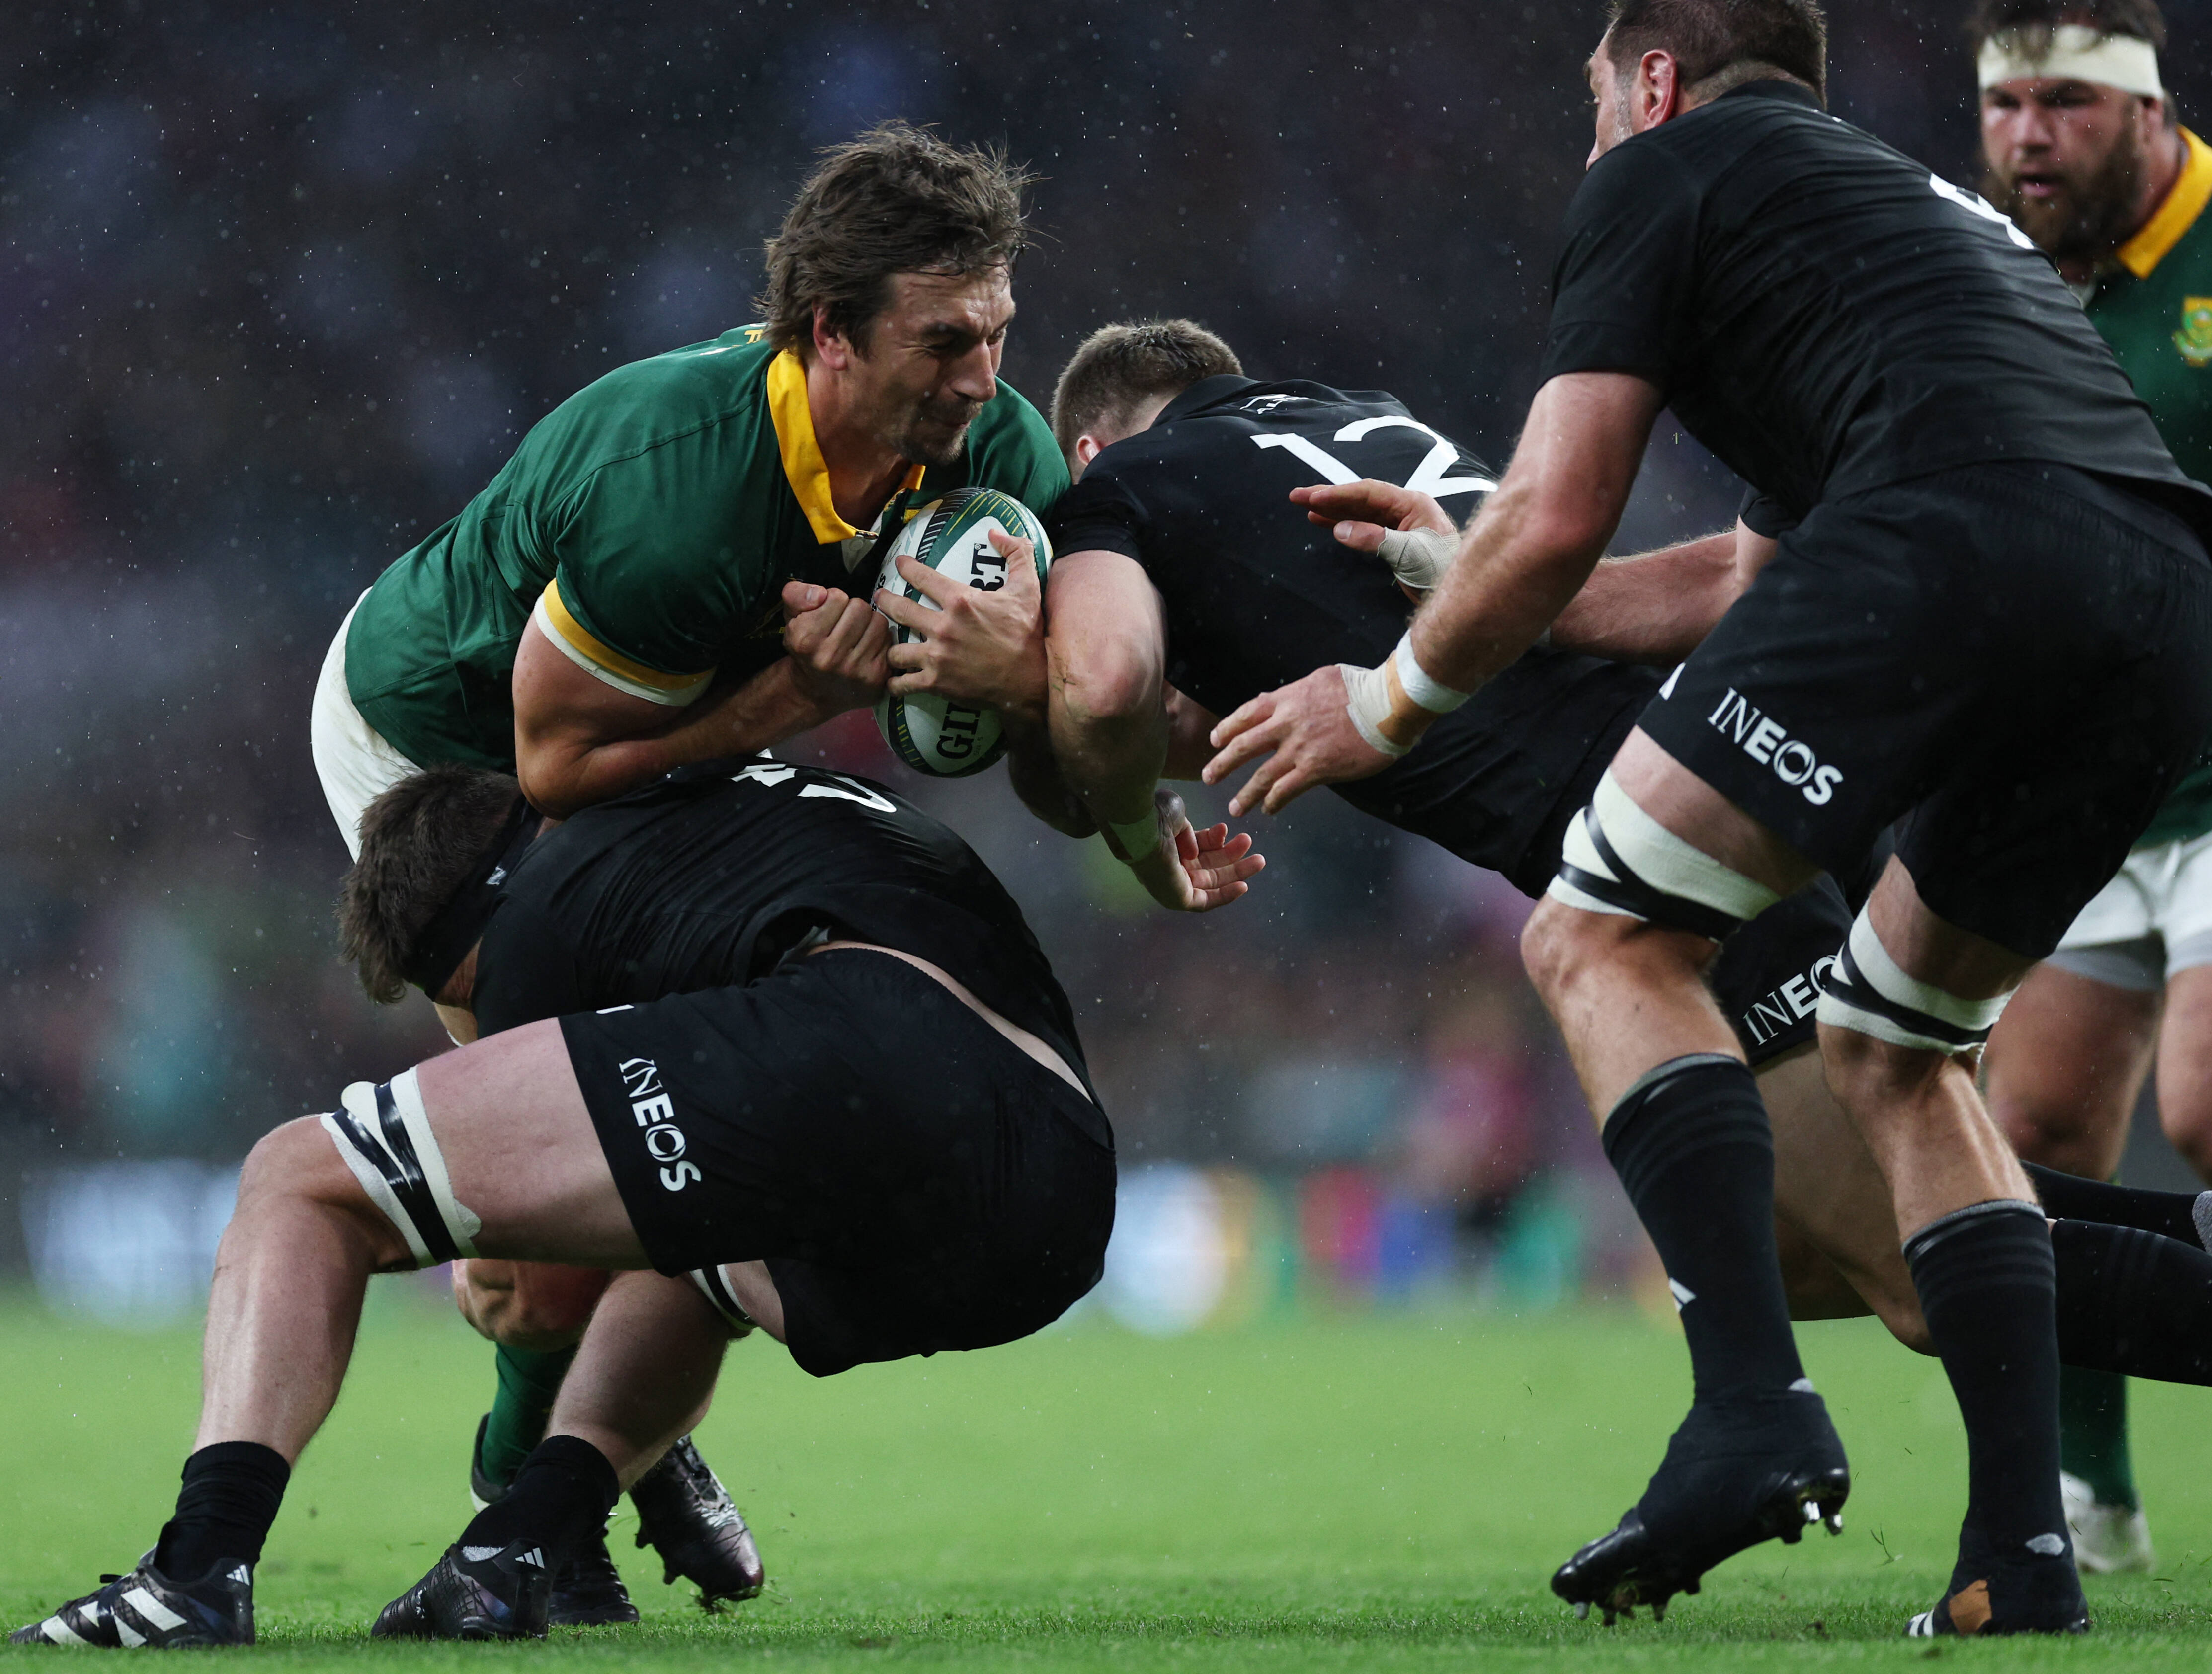 South Africans and New Zealanders are in for history on Saturday evening